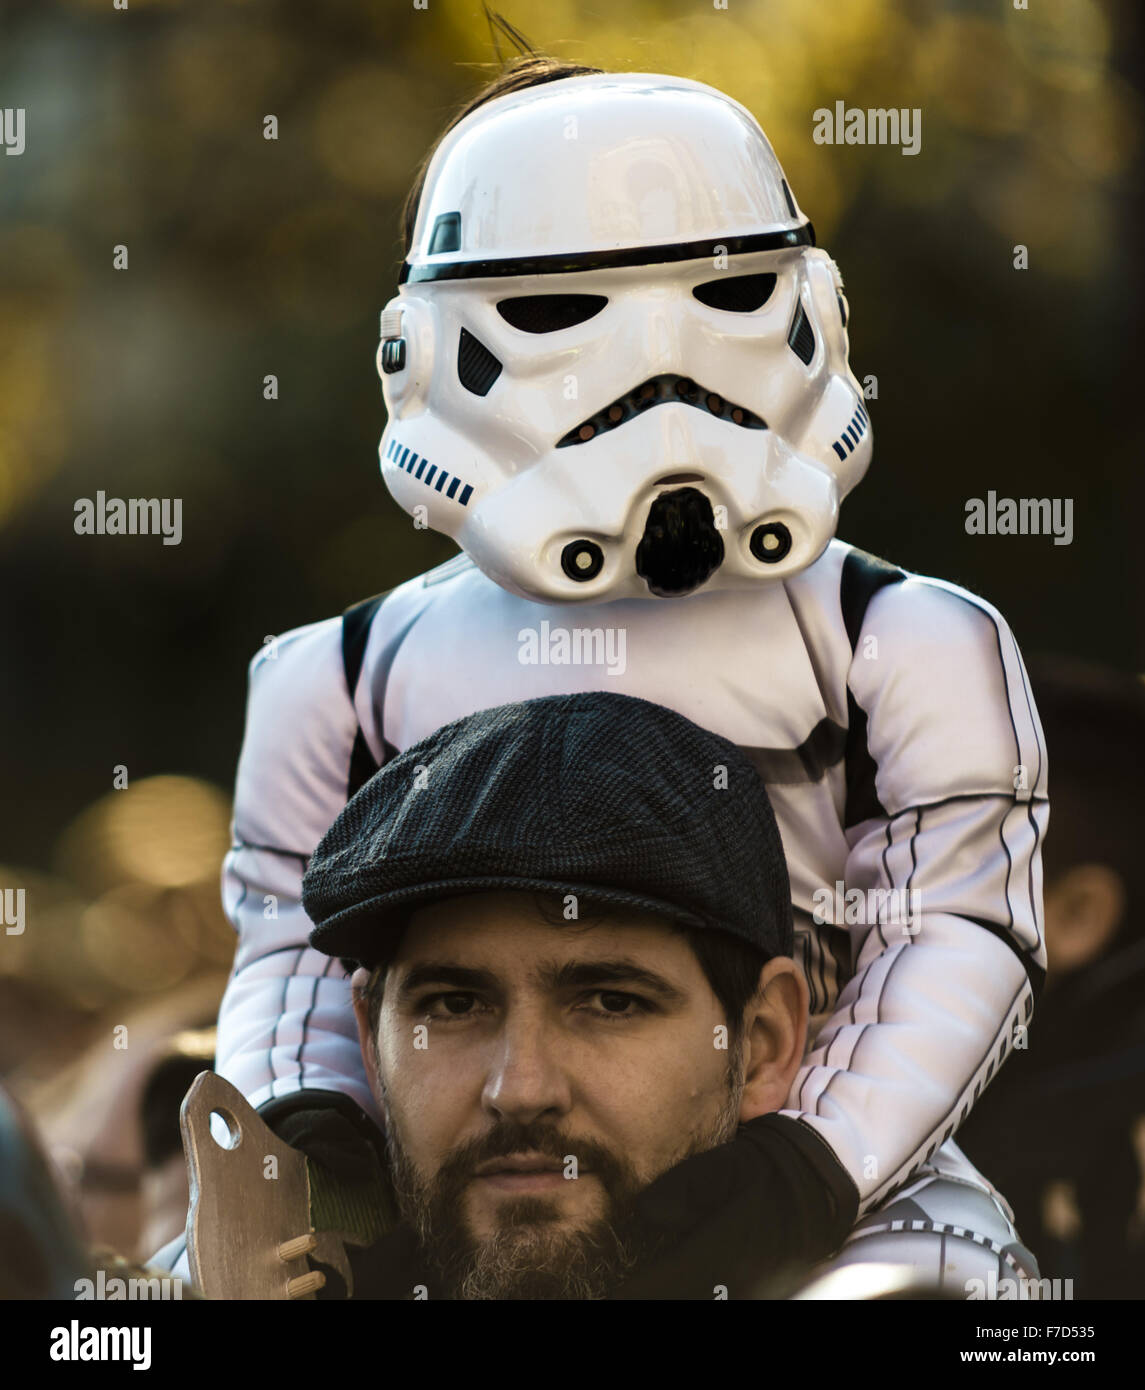 Barcelona, Catalonia, Spain. 29th Nov, 2015. A boy taking part in the 9th Star Wars parade in front of Barcelona's Arc de Triomf on the shoulders of his father is dressed up as the 'Stromtrooper' movie characters © Matthias Oesterle/ZUMA Wire/Alamy Live News Stock Photo